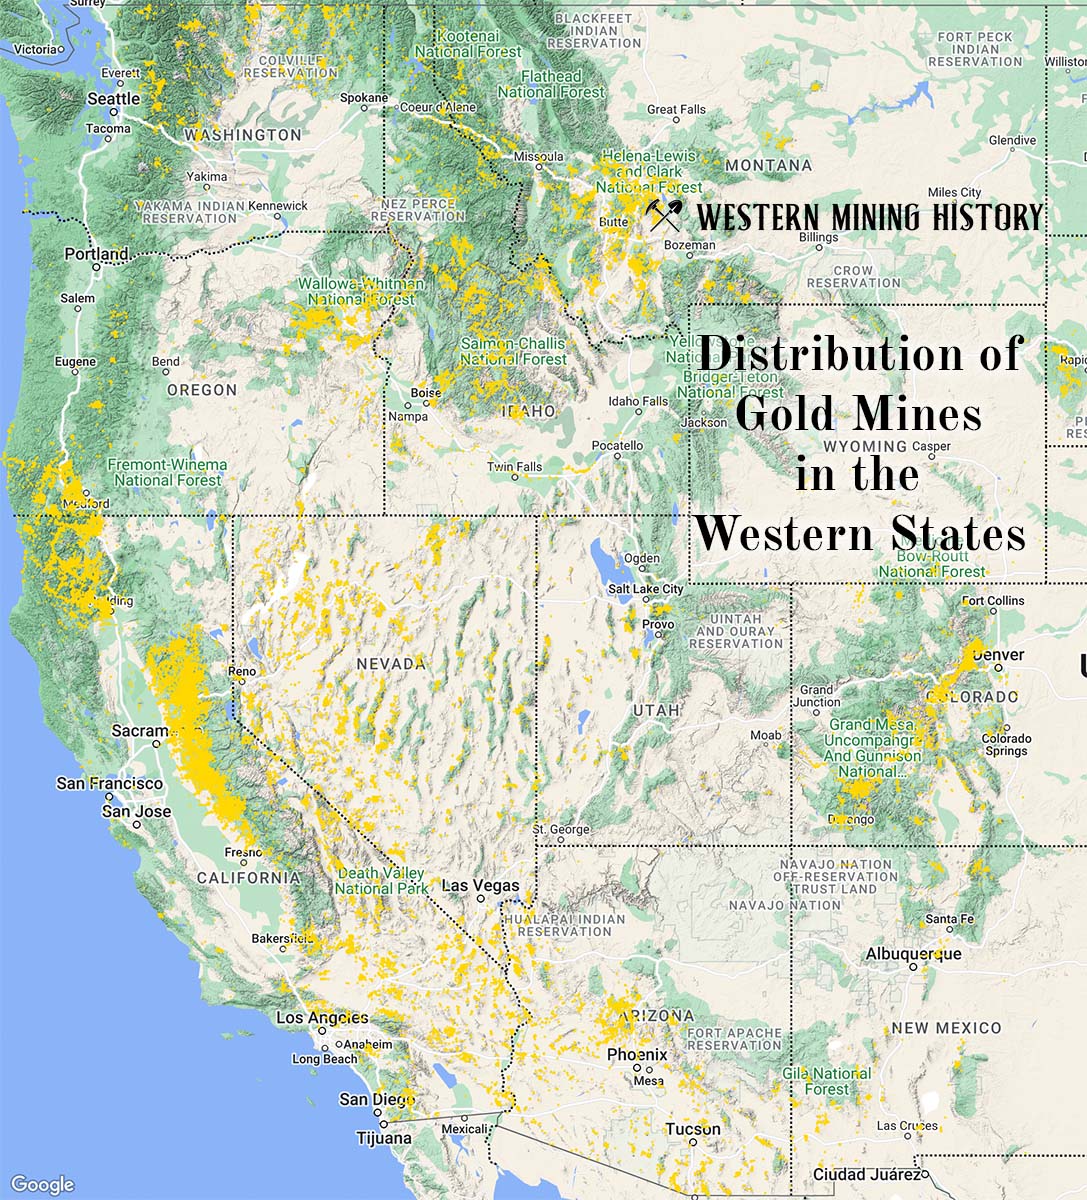 The Top Ten Gold Producing States